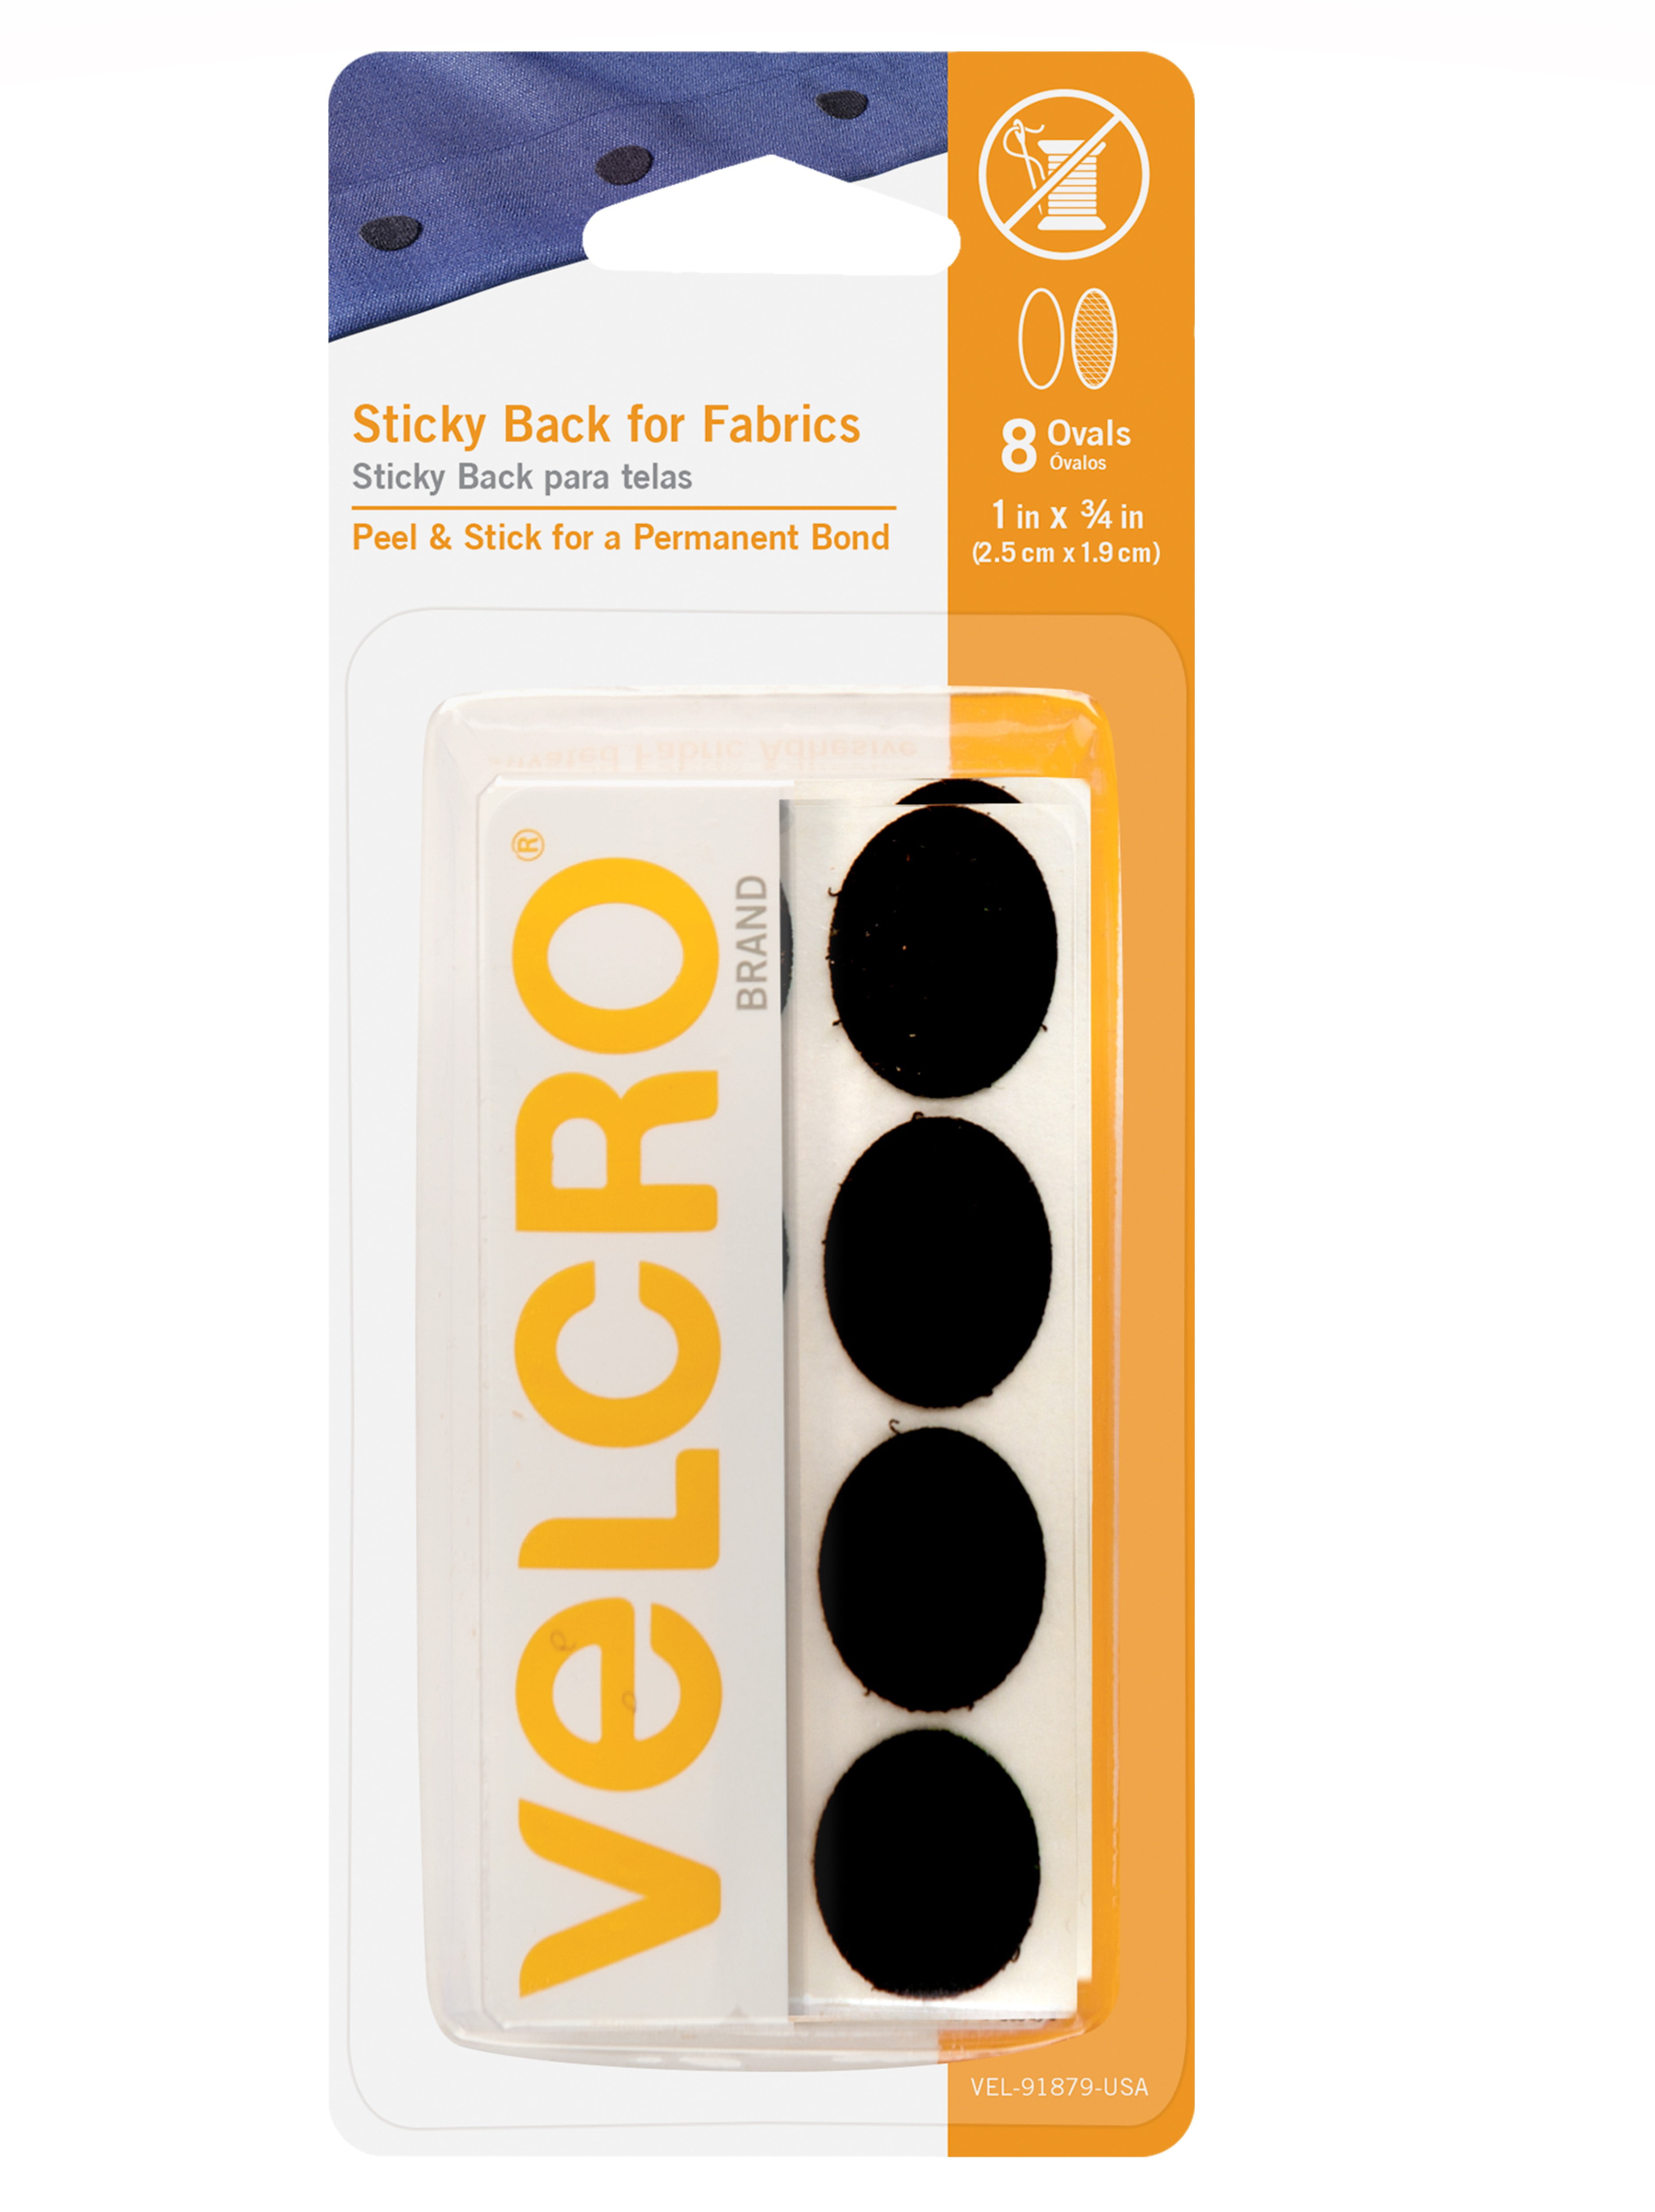 VELCRO Brand For Fabrics Sew On Fabric Tape for Alterations, No Ironing  36in x 2in Roll White